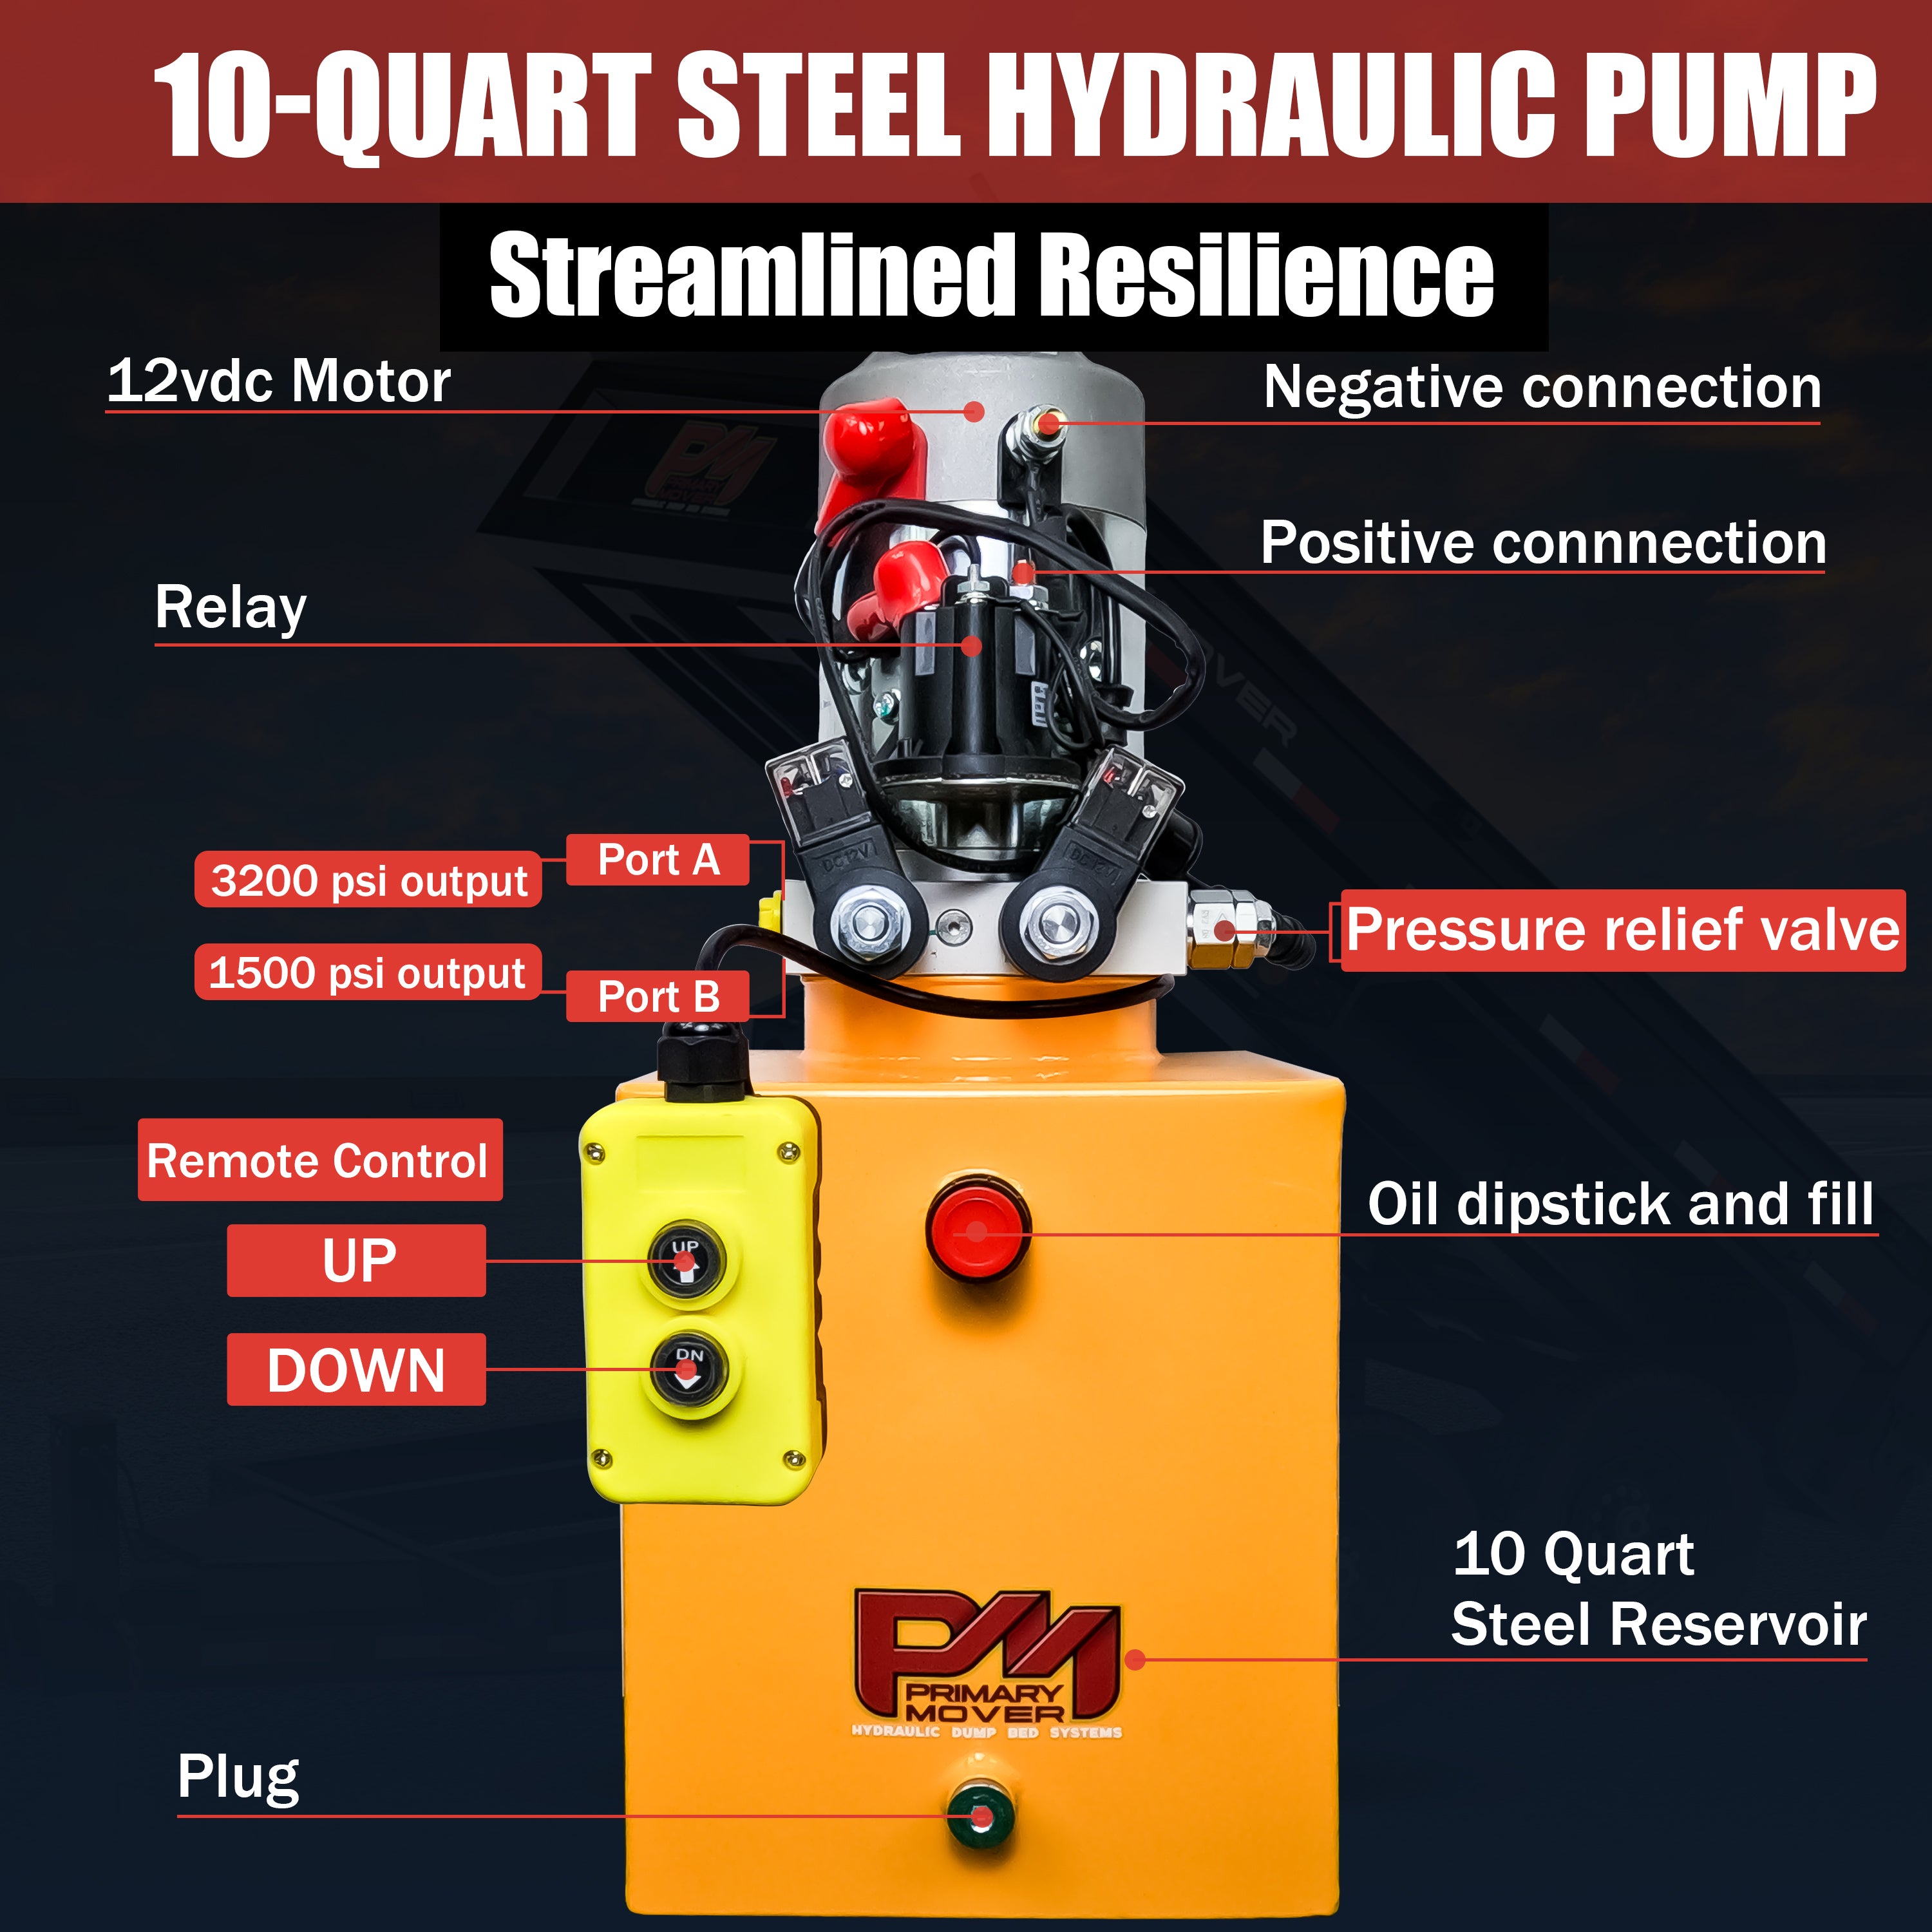 Primary Mover Double Acting 12VDC Hydraulic Power Unit with Steel Reservoirs, featuring dual-acting precision, tailored for dump bed systems, and crafted for durability and value.